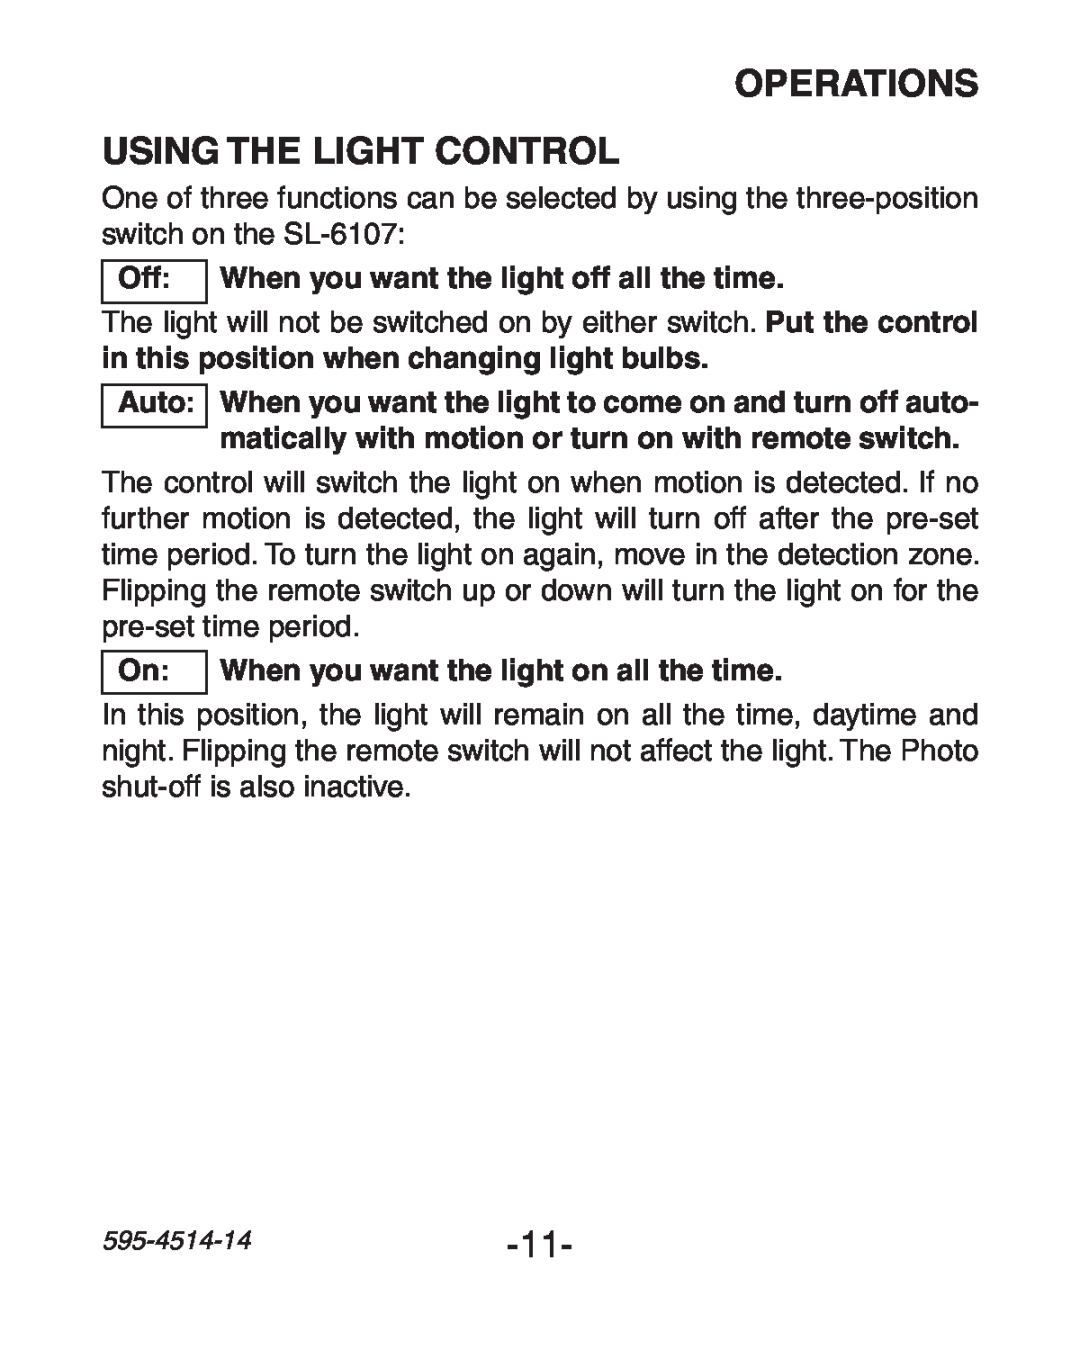 Heath Zenith SL-6107 manual OPERATIONS Using the Light Control, Off When you want the light off all the time, Auto 